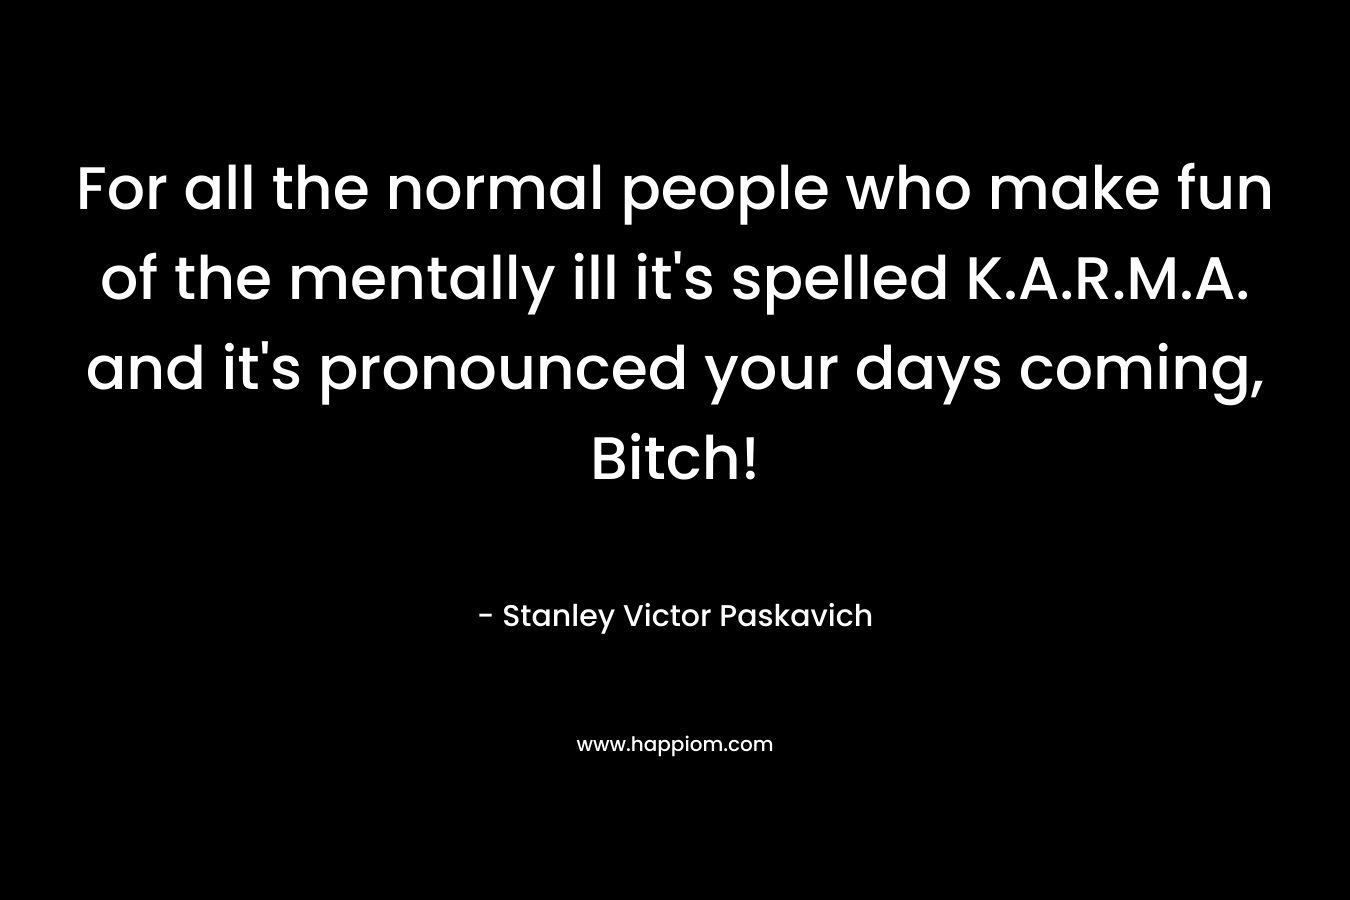 For all the normal people who make fun of the mentally ill it’s spelled K.A.R.M.A. and it’s pronounced your days coming, Bitch! – Stanley Victor Paskavich